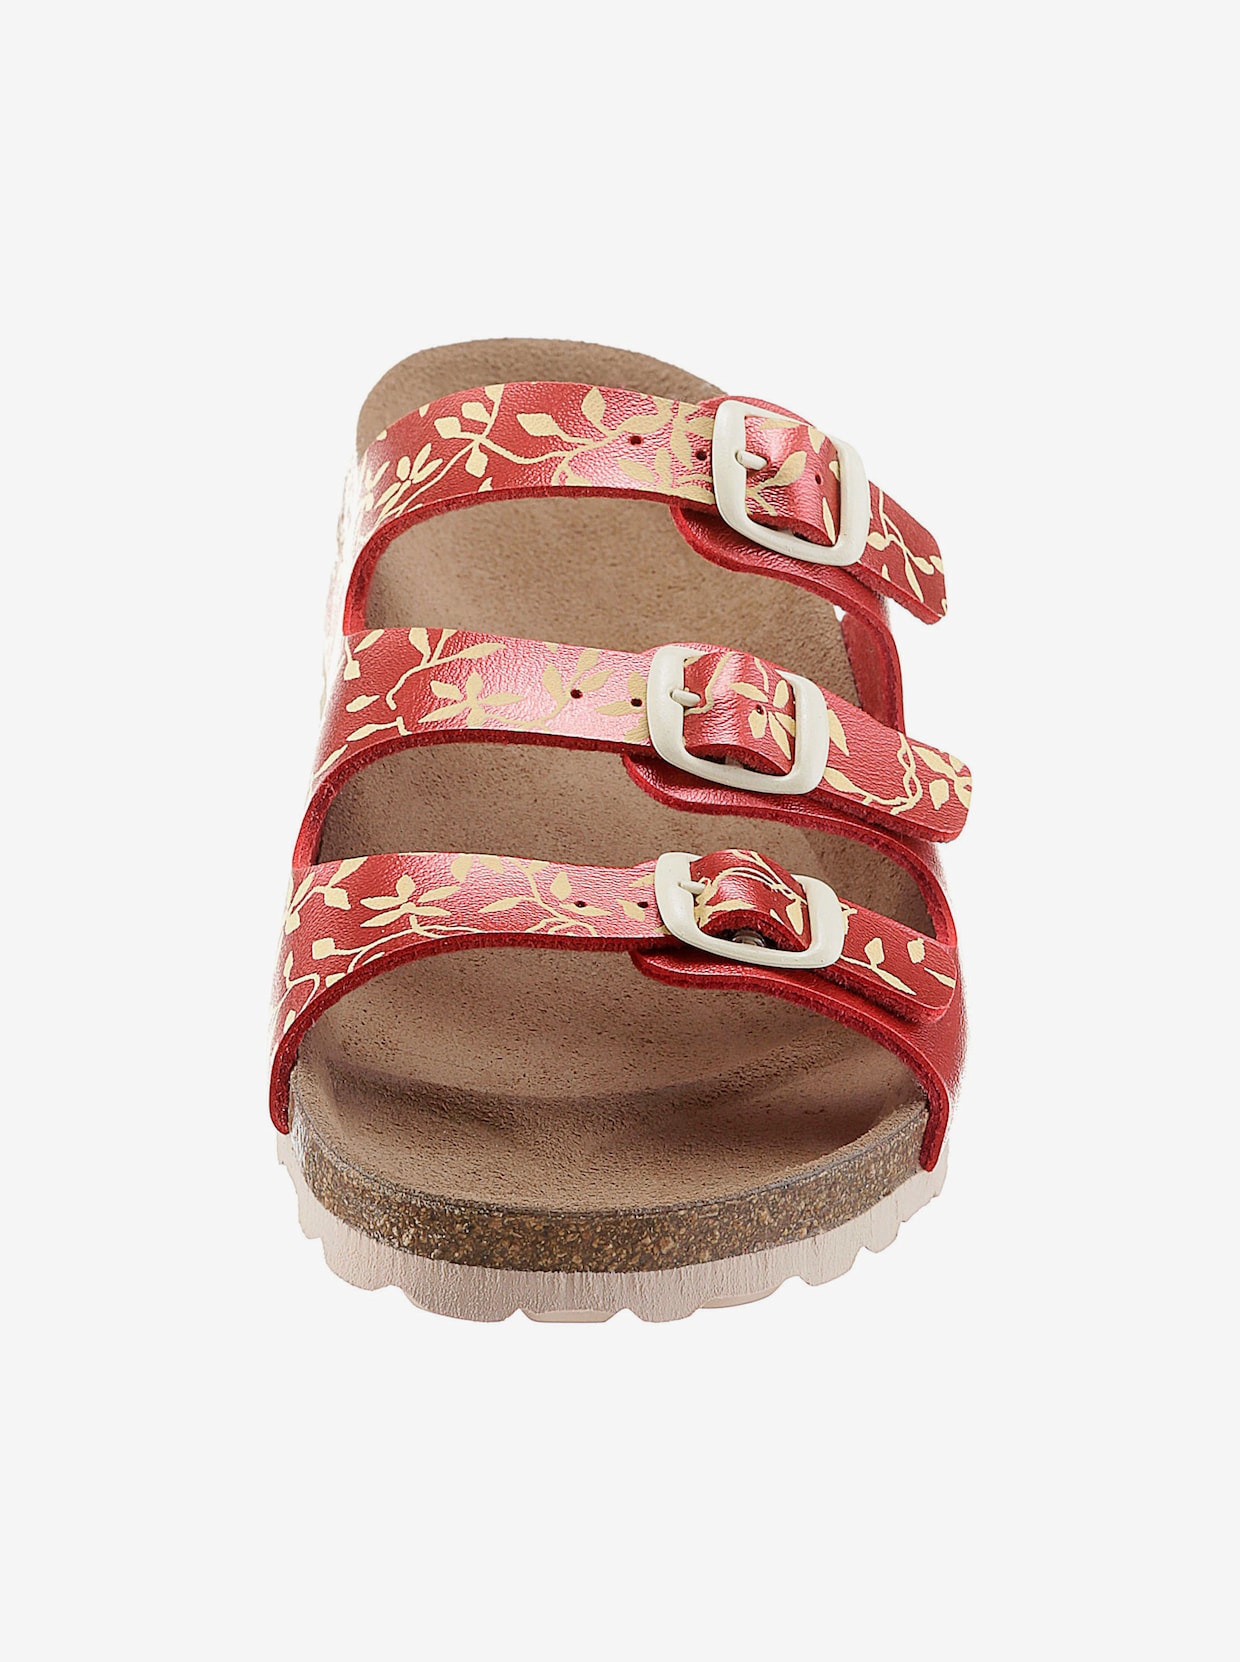 Bio Time slippers - rood geprint